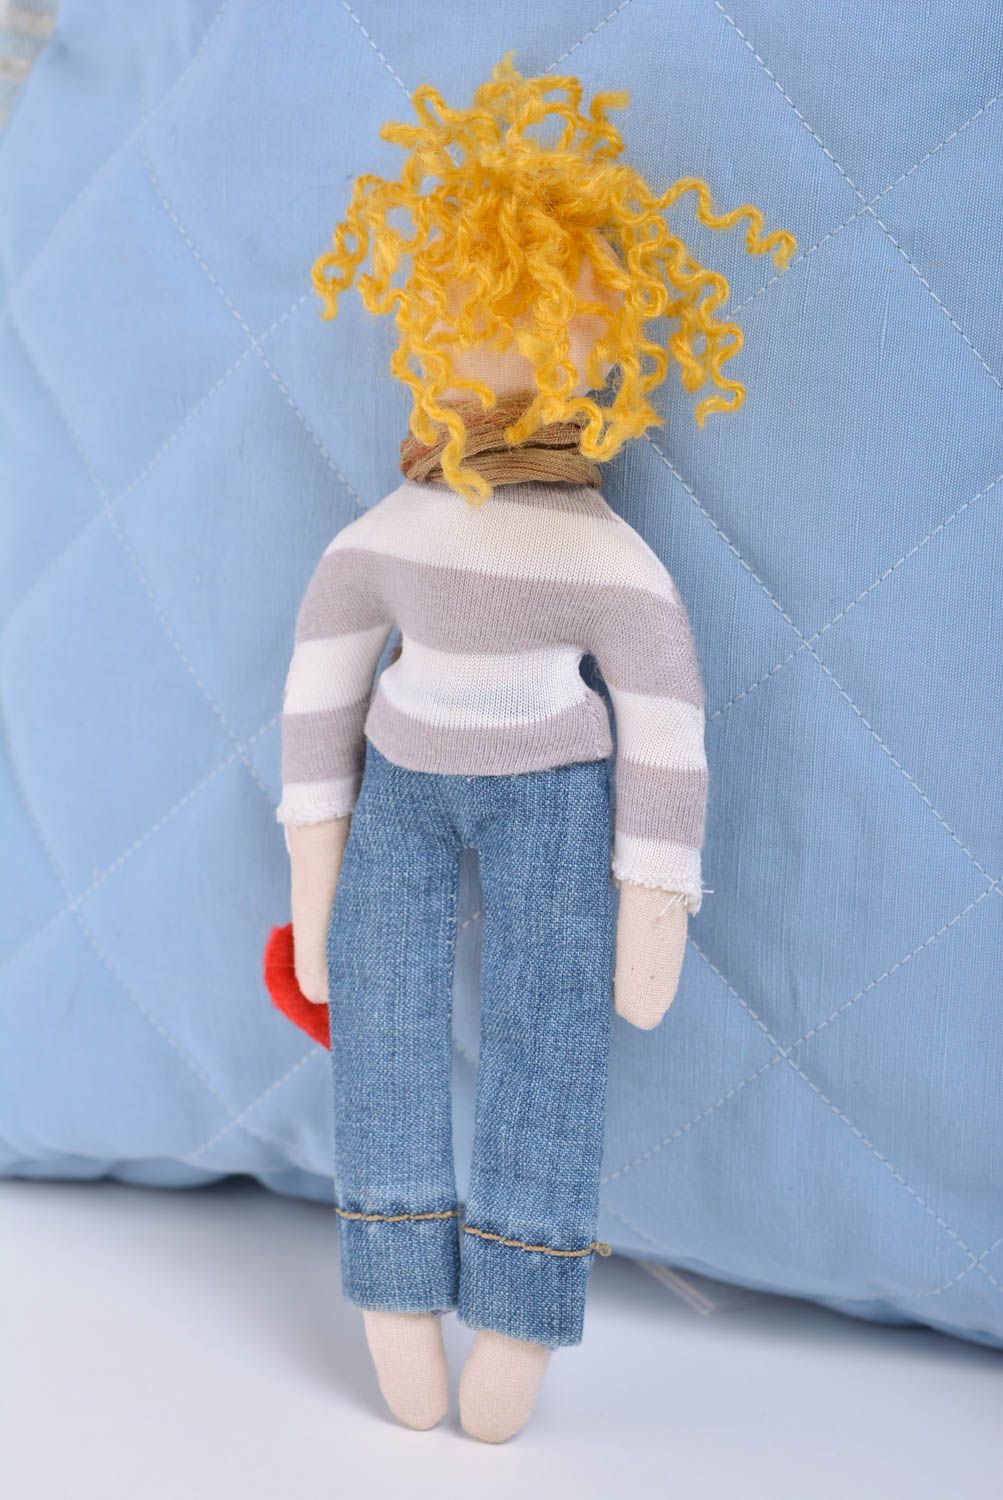 Handmade designer interior fabric soft toy boy with light curly hair in sweater photo 3